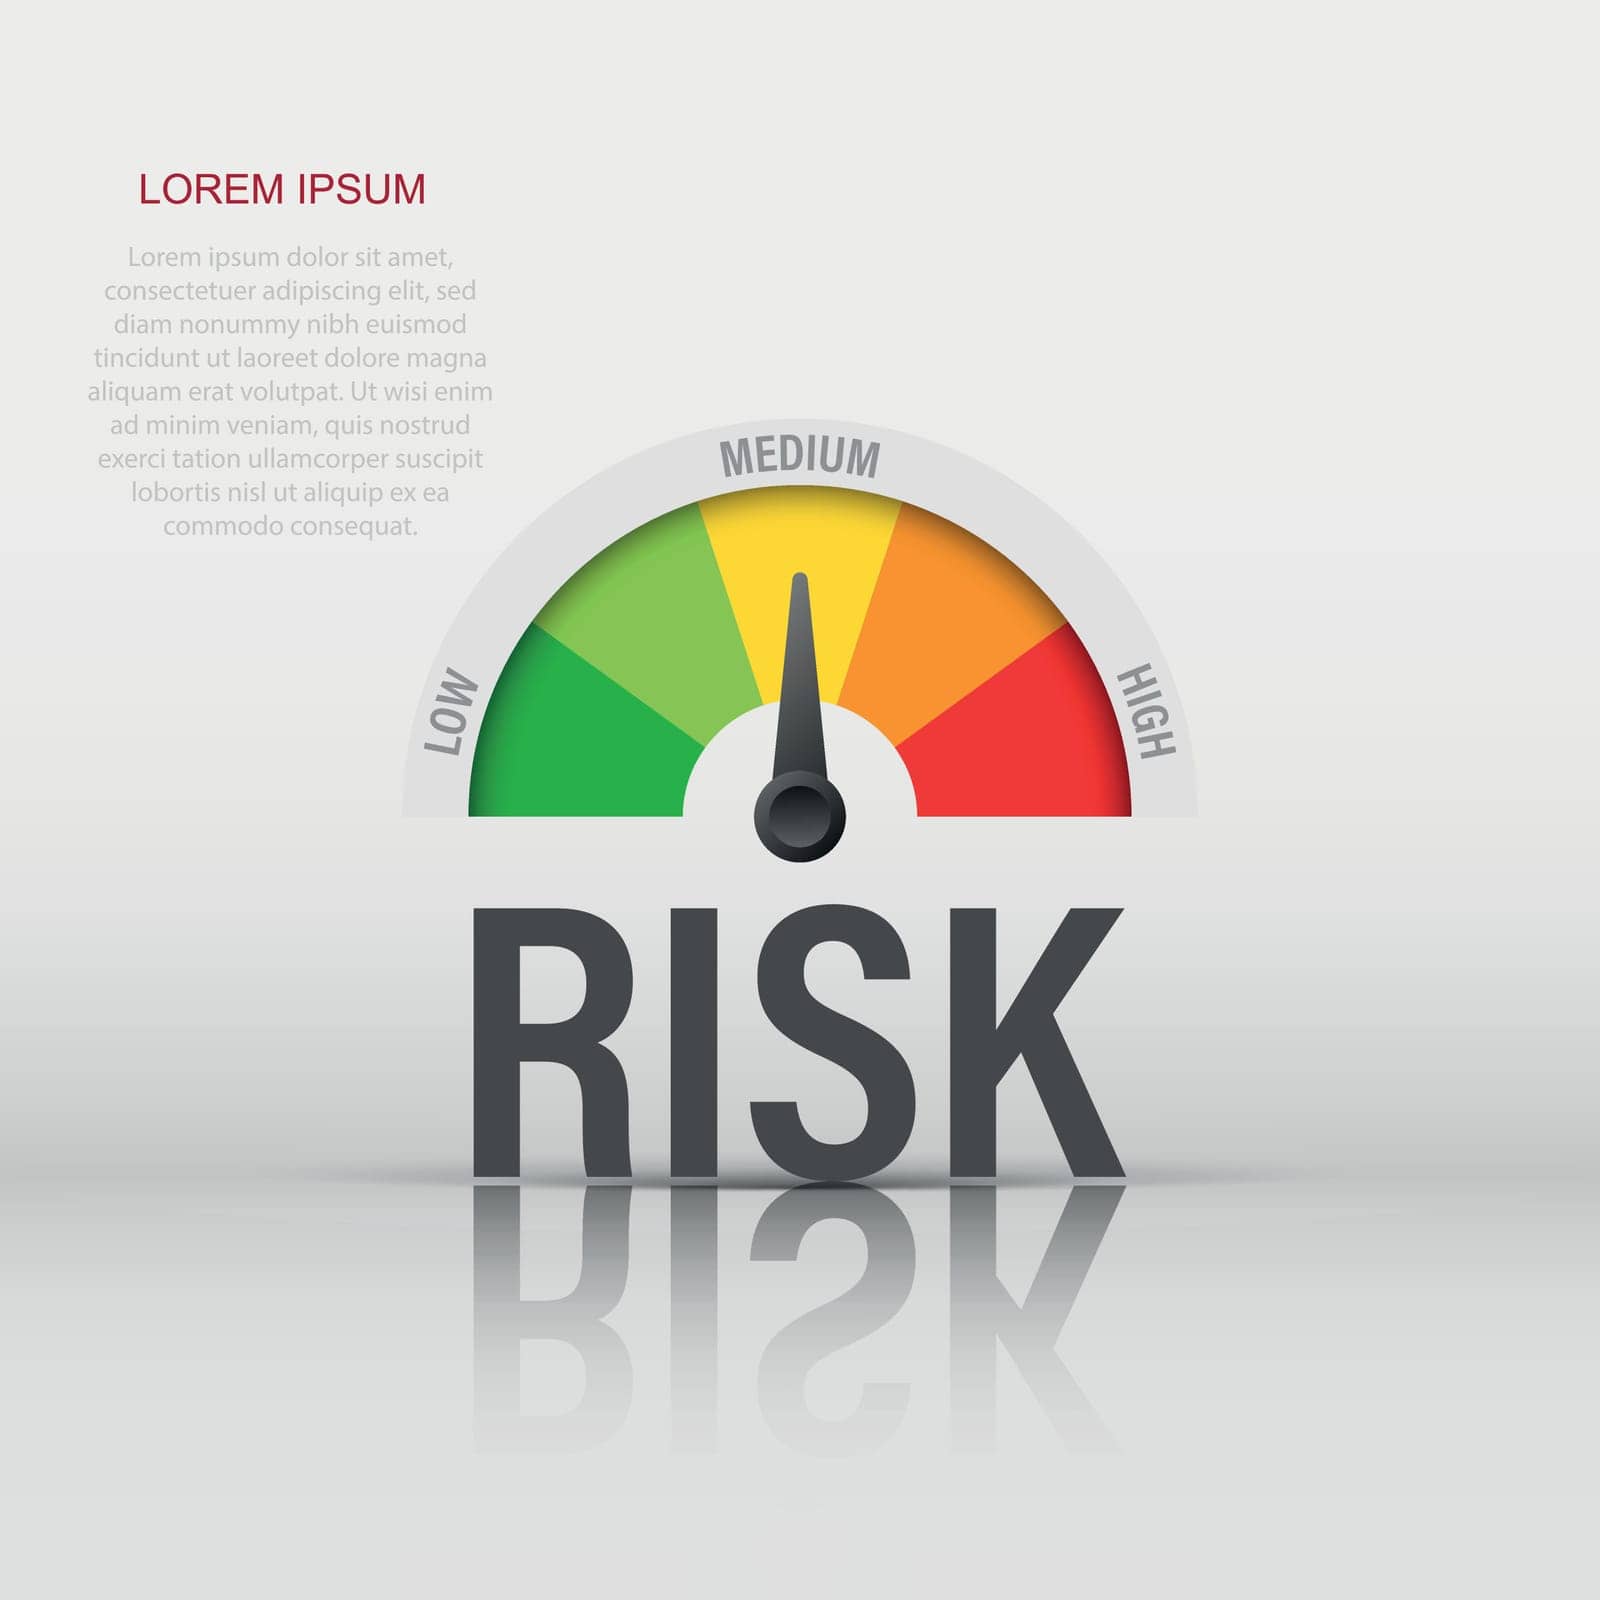 Risk meter icon in flat style. Rating indicator vector illustration on white isolated background. Fuel level sign business concept.